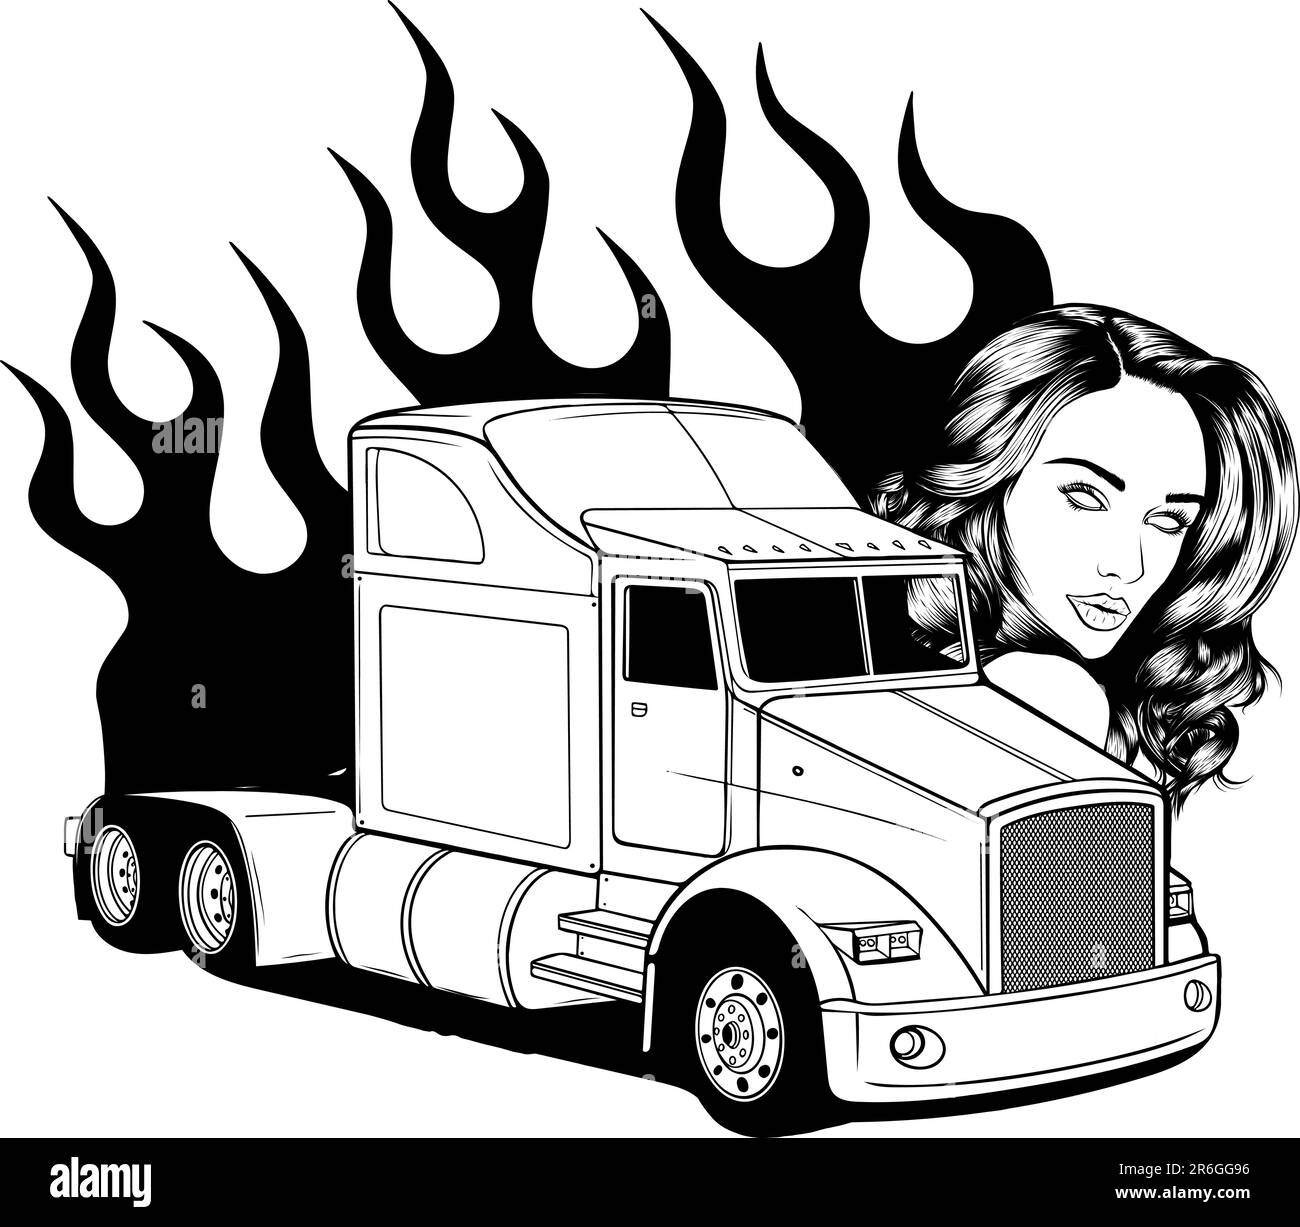 Monochrome semi truck with woman face and flames vector illustration on white background Stock Vector